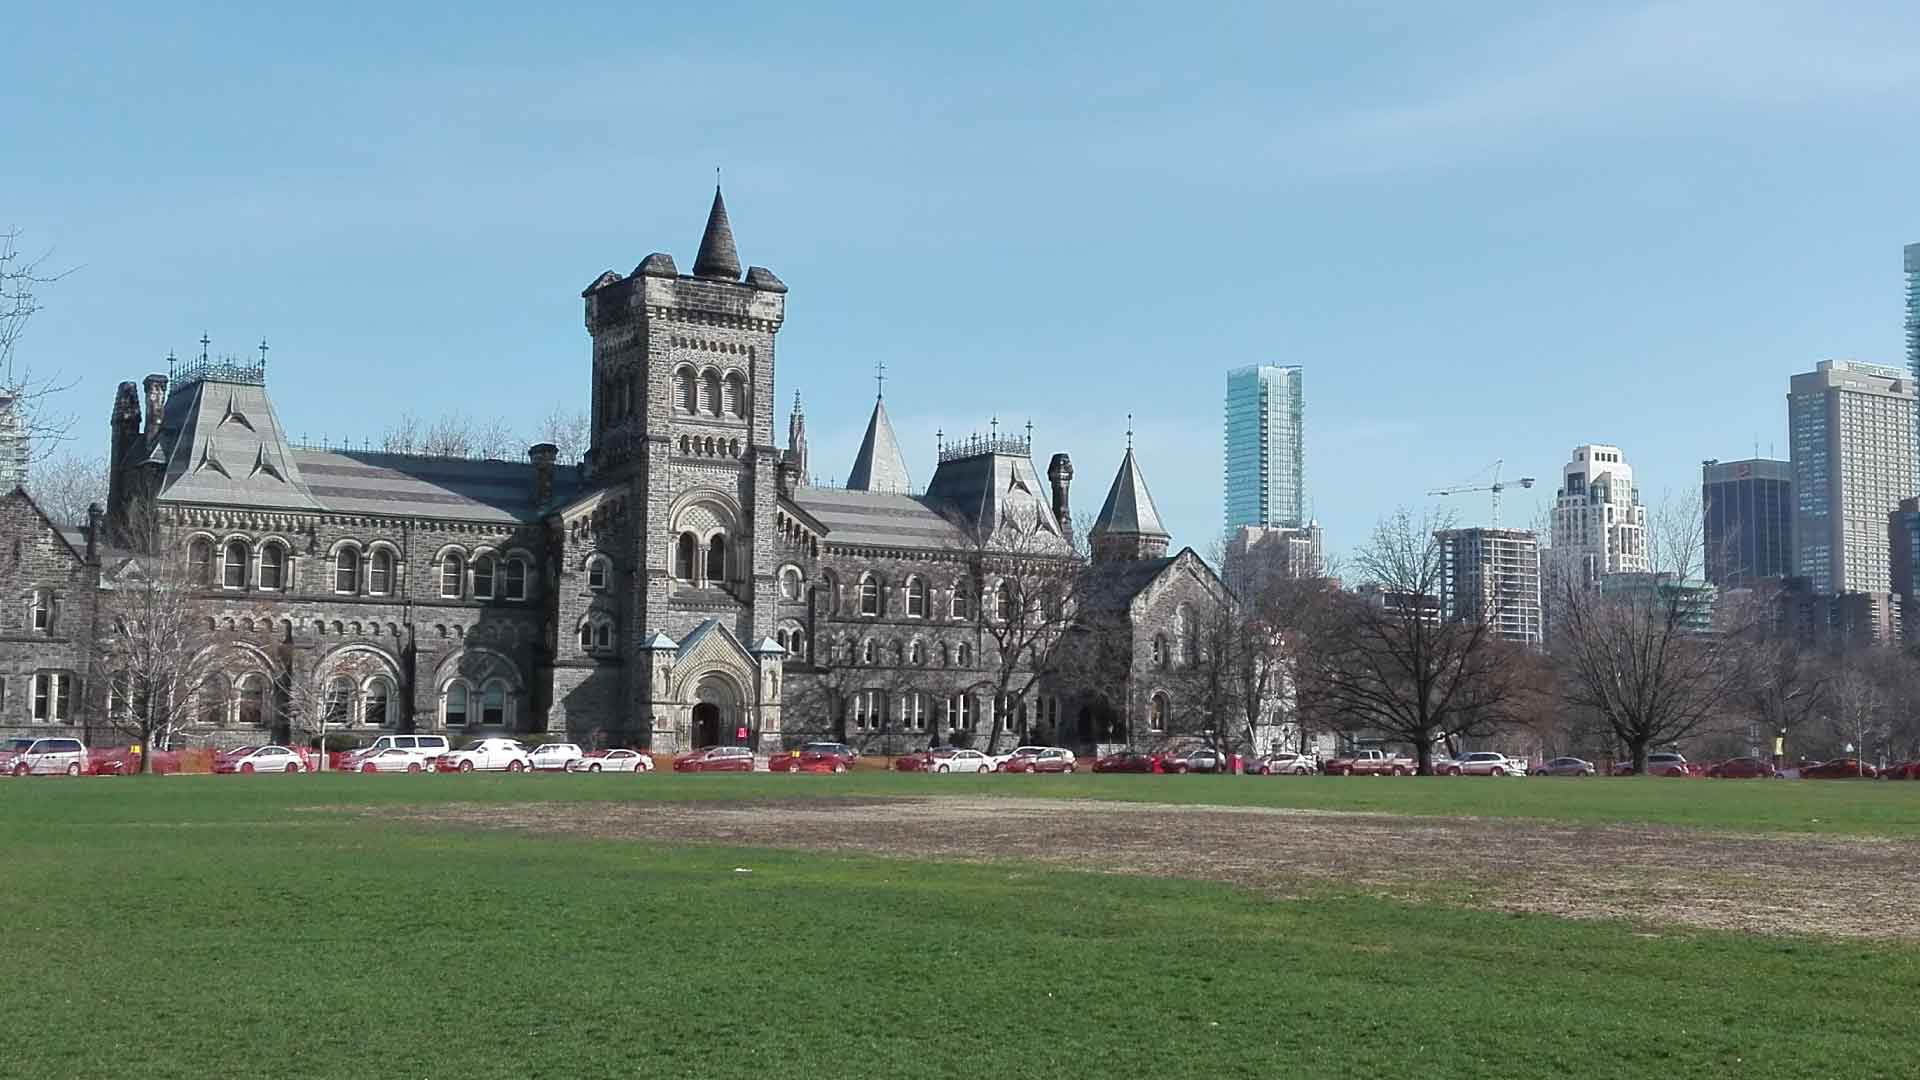 University College at the University of Toronto with the Toronto skyline to the right